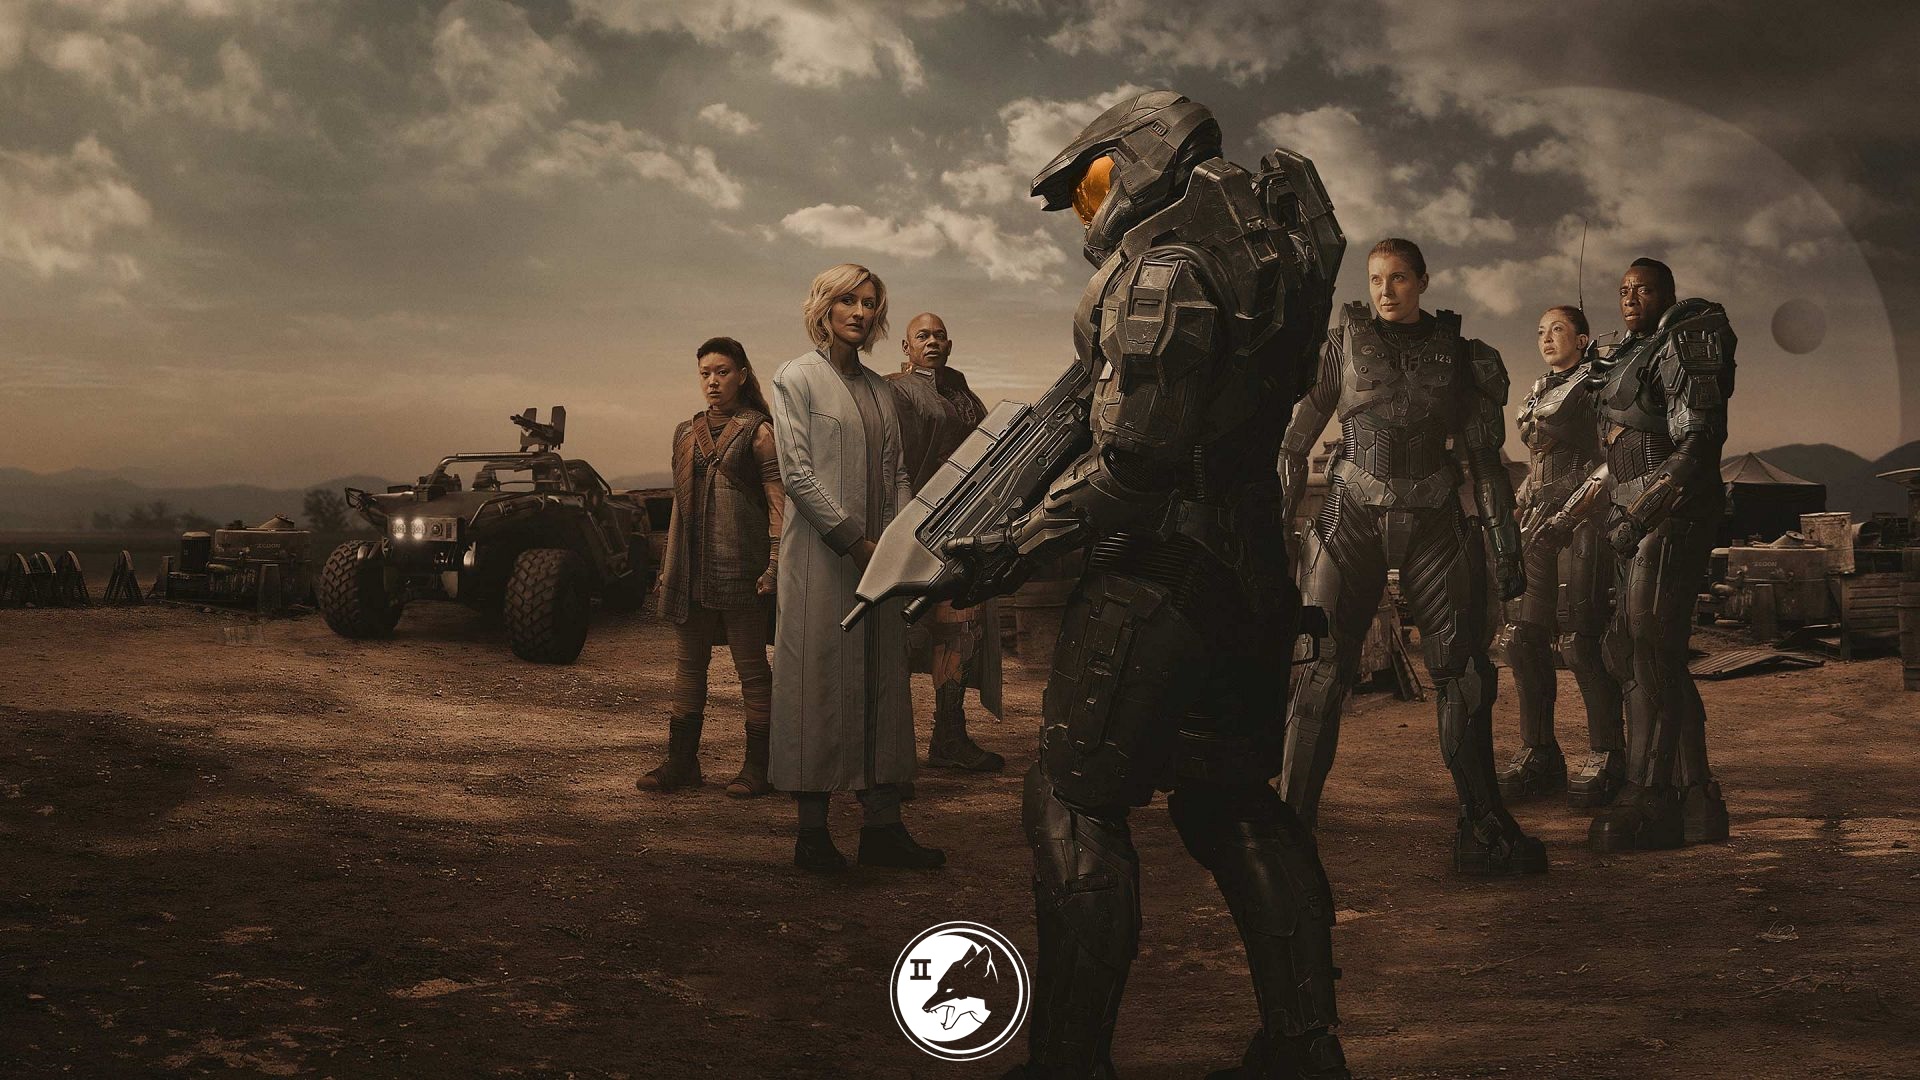 Halo TV Show Trailer Brings Master Chief Into Live-Action for